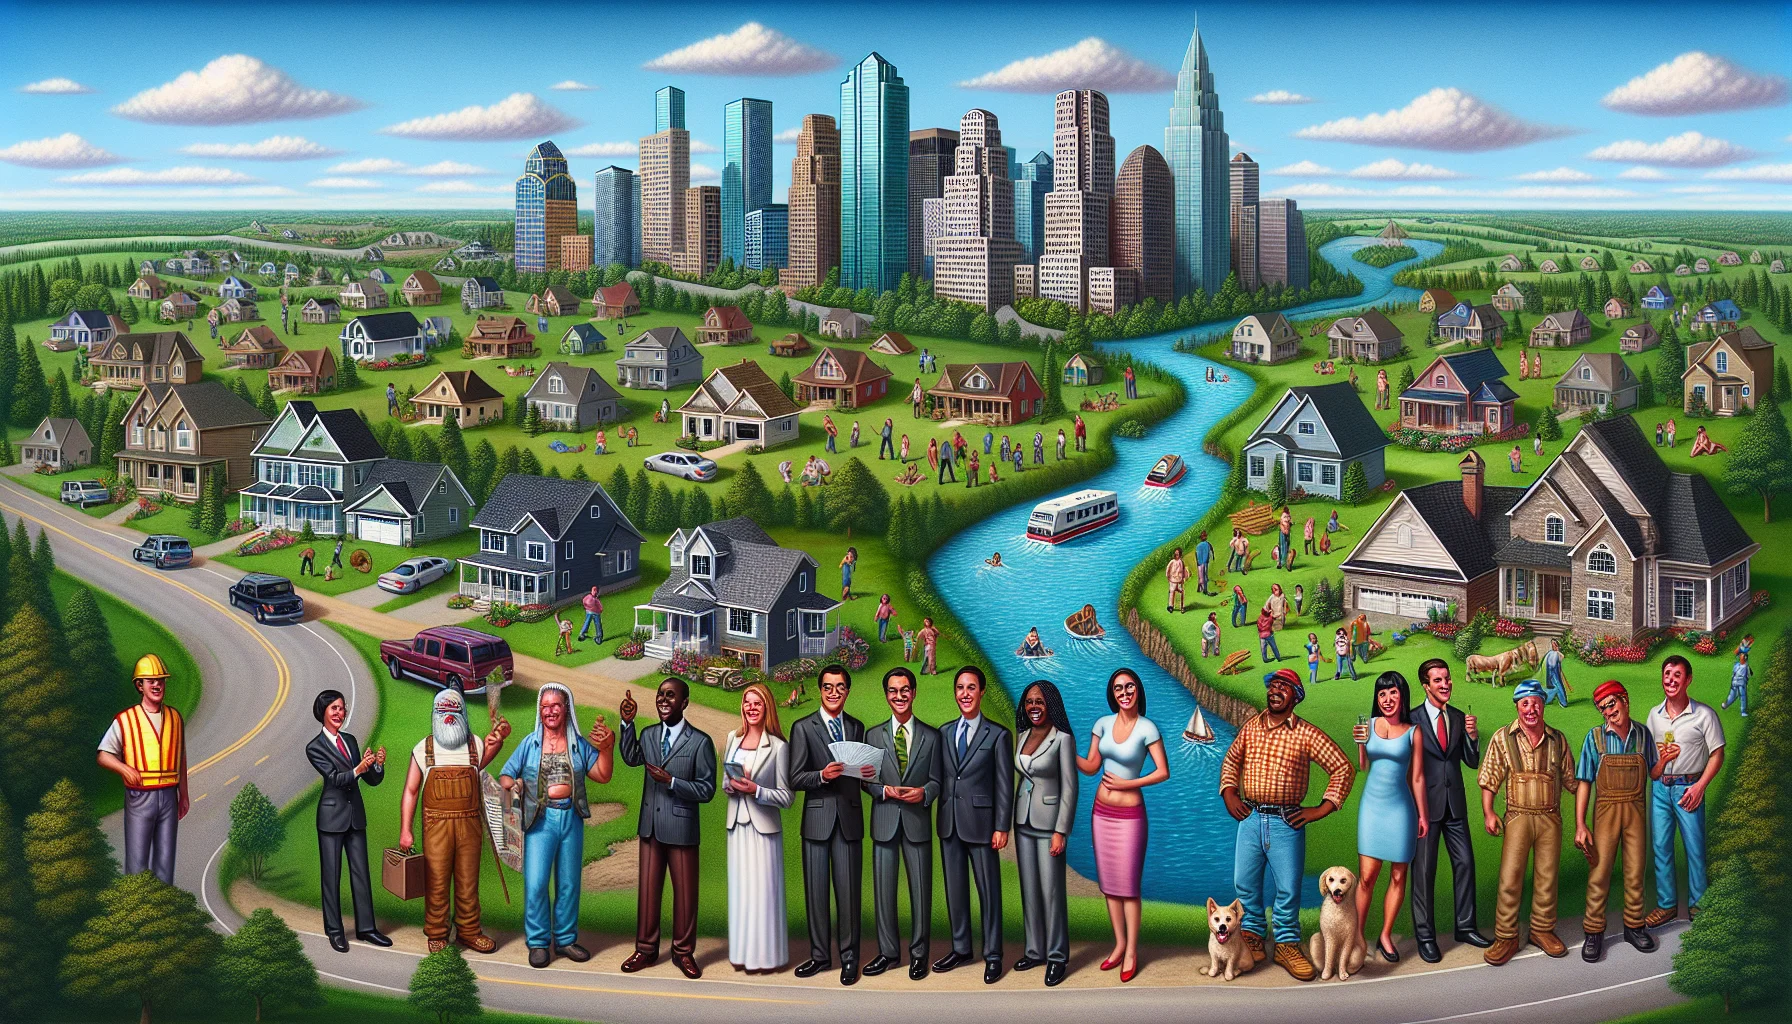 A humorous yet realistic image of an ideal real estate scenario in a national context. The scene prominently features a lush green landscape with a scenic river flowing through it, a mix of modern skyscrapers, charming suburban houses, and picturesque country cottages. Diverse people from different descents including Caucasian, Hispanic, Black, Middle-Eastern, and South Asian can be seen, some of them are real-estate agents in sharp suits showing off the properties to potential buyers, some are happy homeowners, while others are construction workers busy on their tasks, laughing and joking around. Traffic-free roads and clear sky add to the perfect scenario.